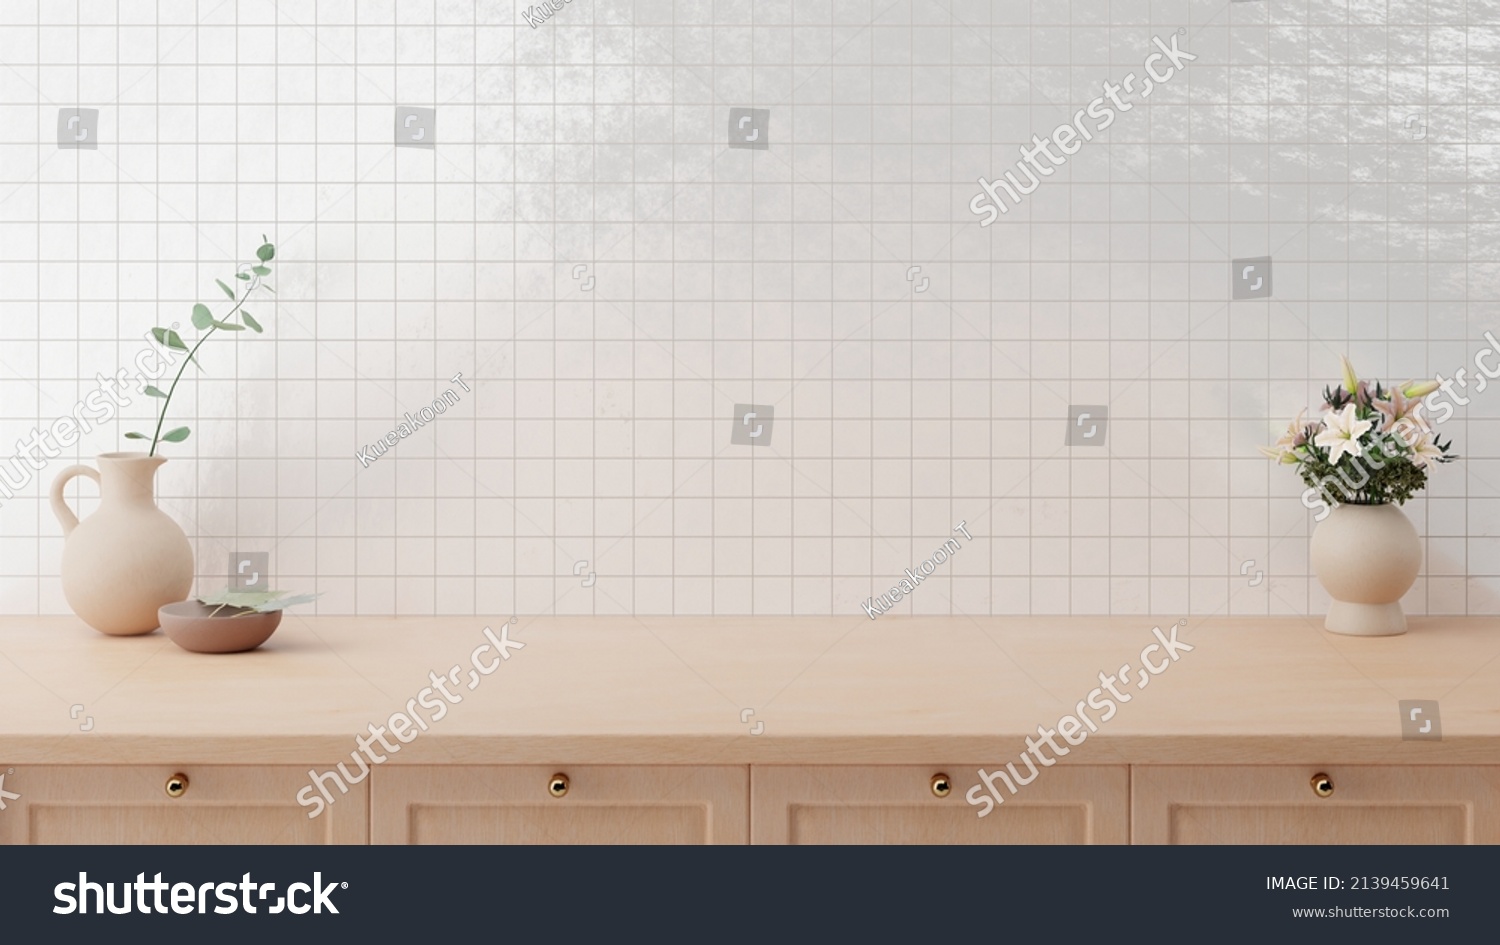 Minimal cozy counter mockup design for product presentation background. Branding in Japan style with bright wood counter and gloss tile wall with vase plant flower bowl. Kitchen interior  #2139459641